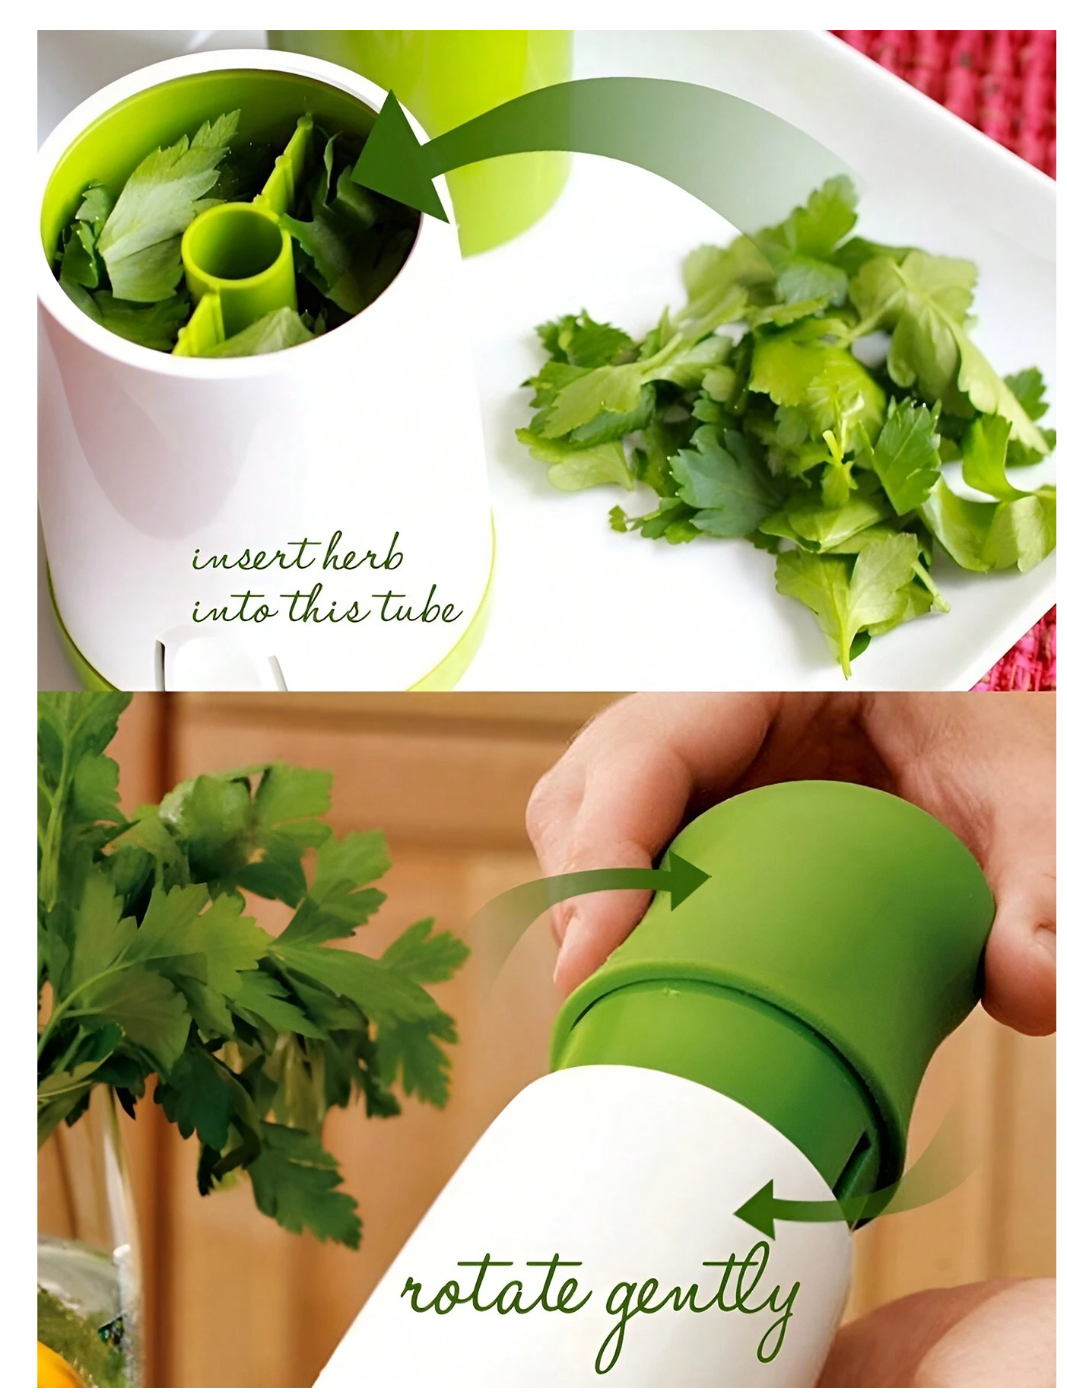 Flavor Fusion Maestro: 1pc Spice Grinder for Grinding Garlic, Coriander, Lemongrass – Elevate Your Culinary Creations!"